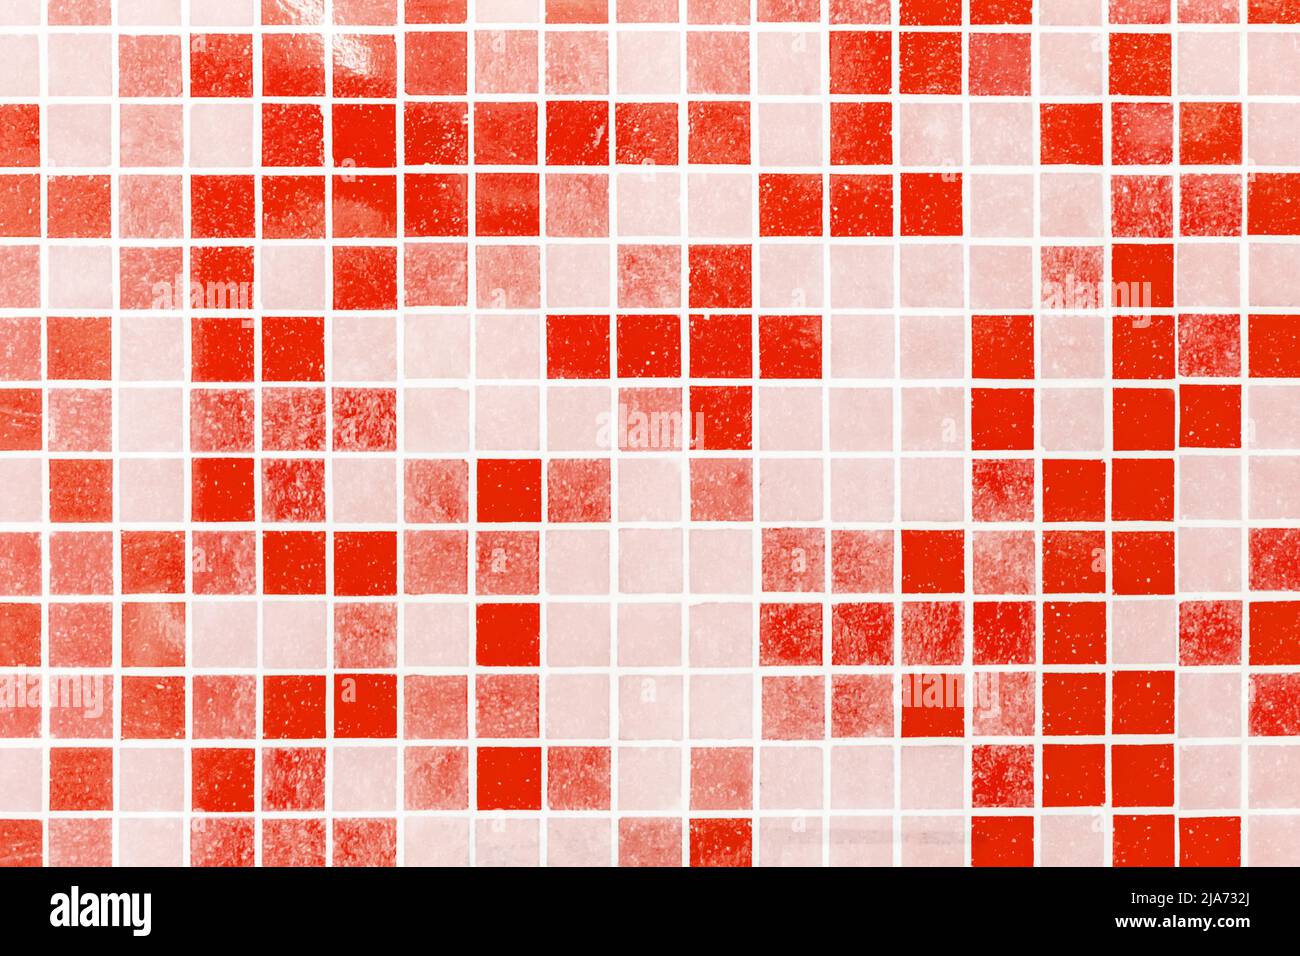 Red Ceramic Tile Mosaic Abstract Pattern Square Design Bath or Pool Texture Background, Soft Focus. Stock Photo